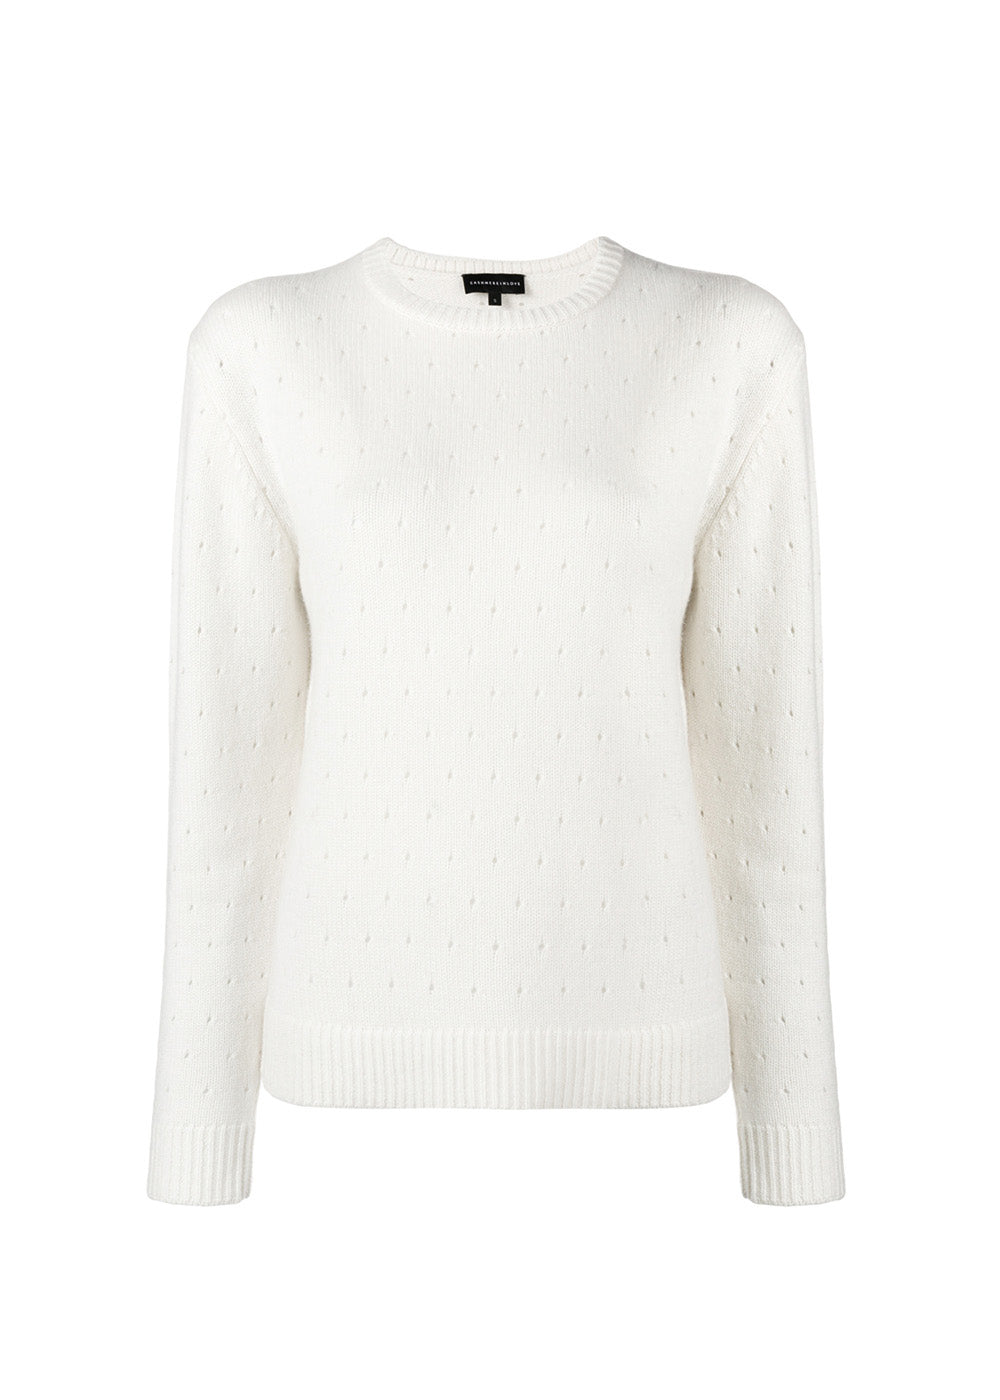 Olympia Jumper - Small / IVORY